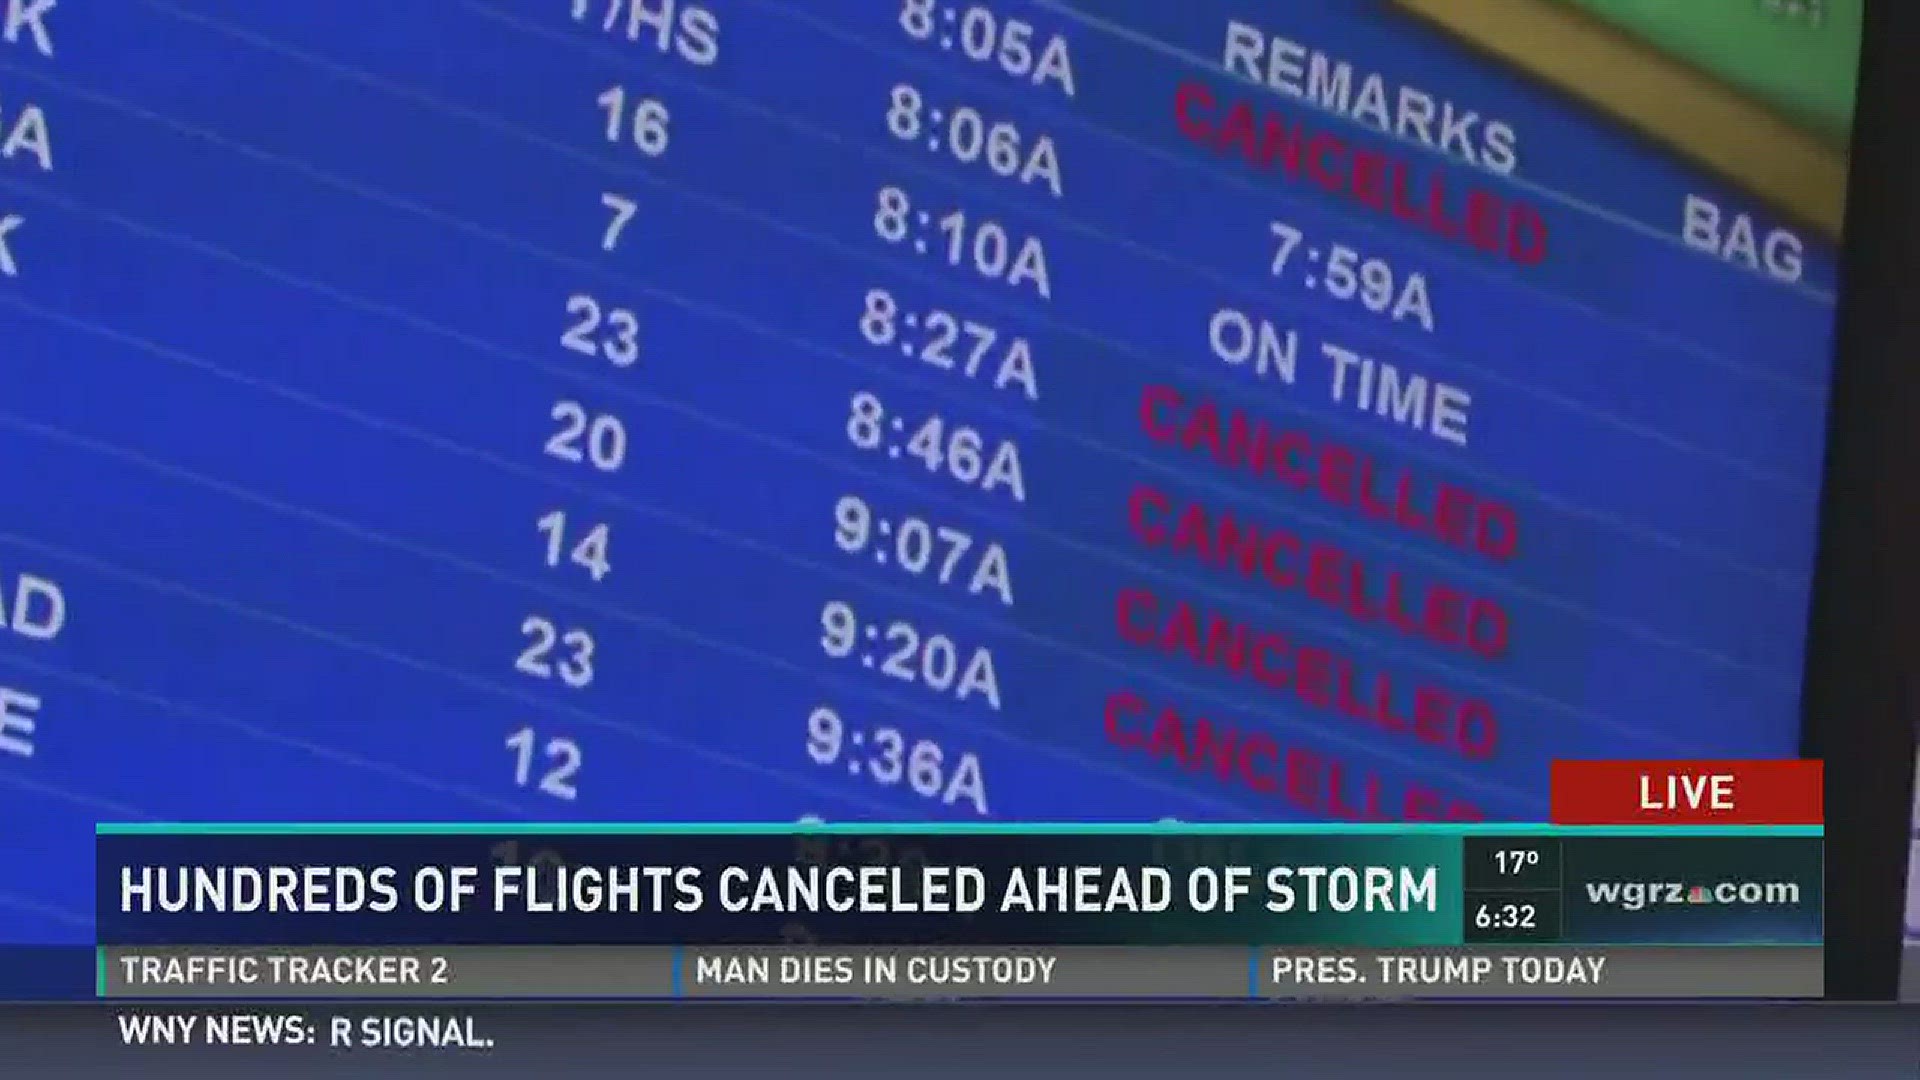 Northeastern Storm affecting flights out of Buffalo